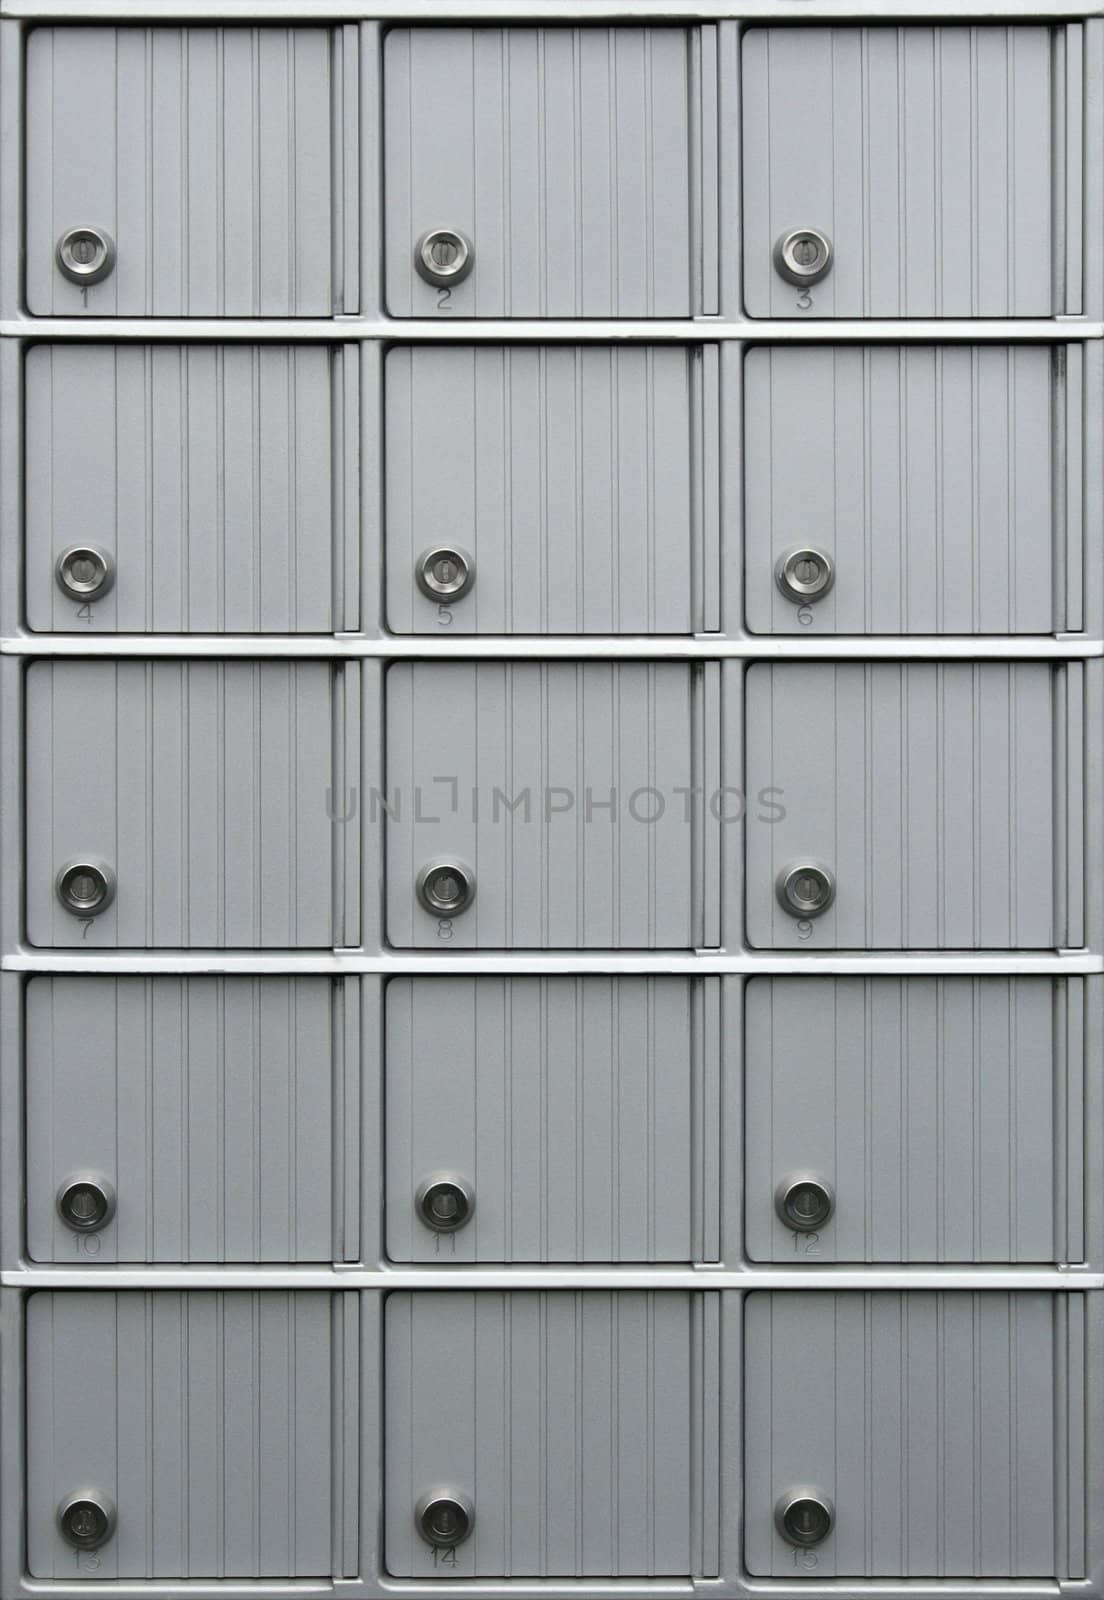 Rows of metallic mailboxes with numbers.